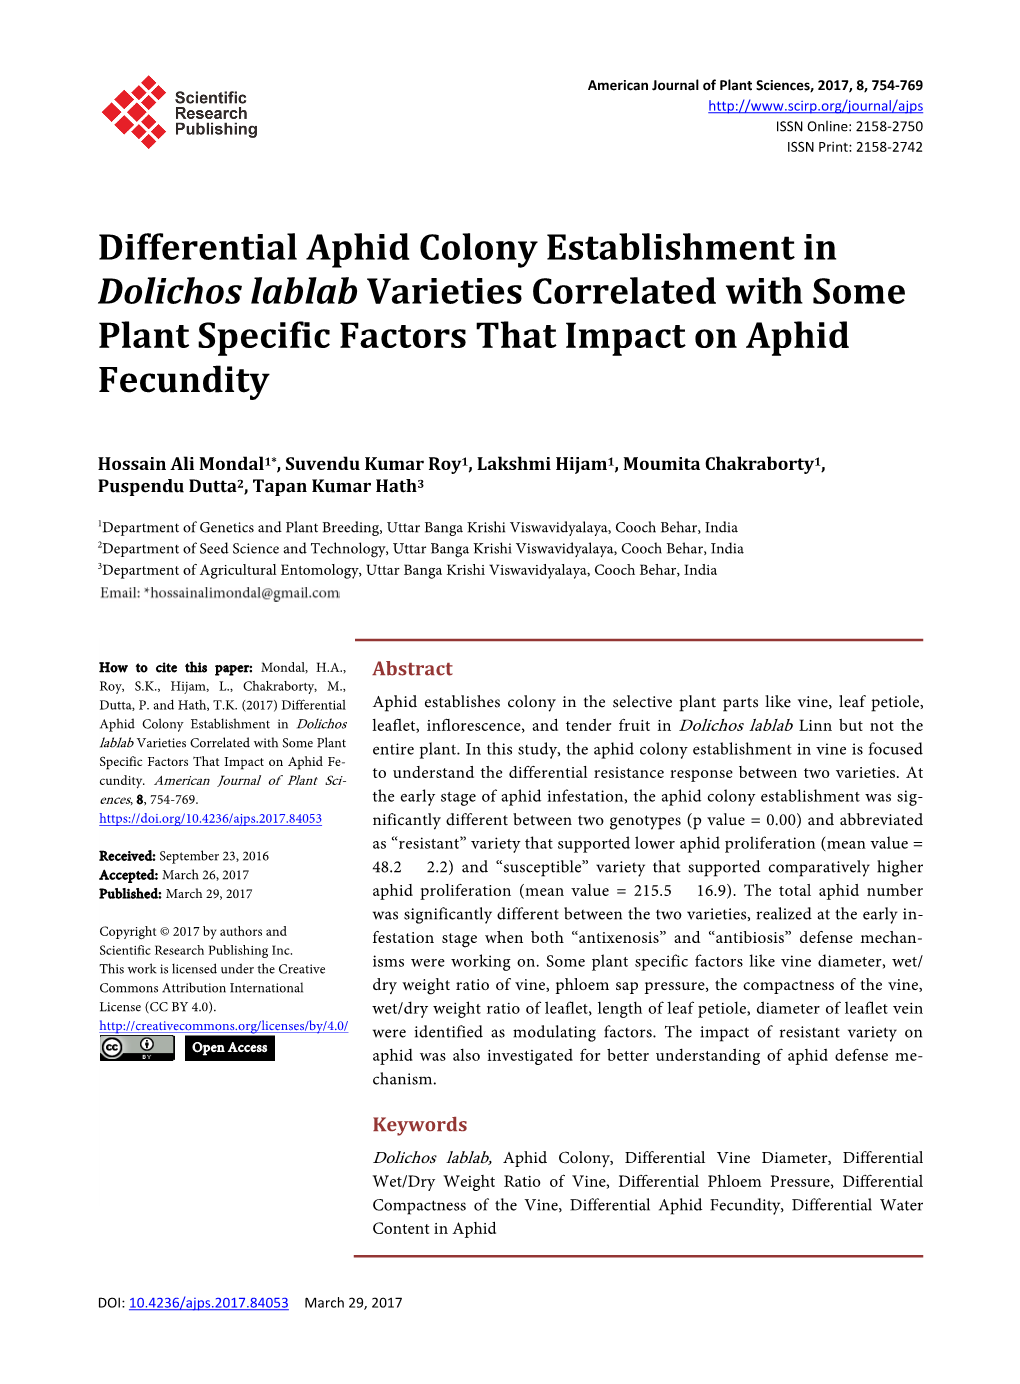 Differential Aphid Colony Establishment in Dolichos Lablab Varieties Correlated with Some Plant Specific Factors That Impact on Aphid Fecundity